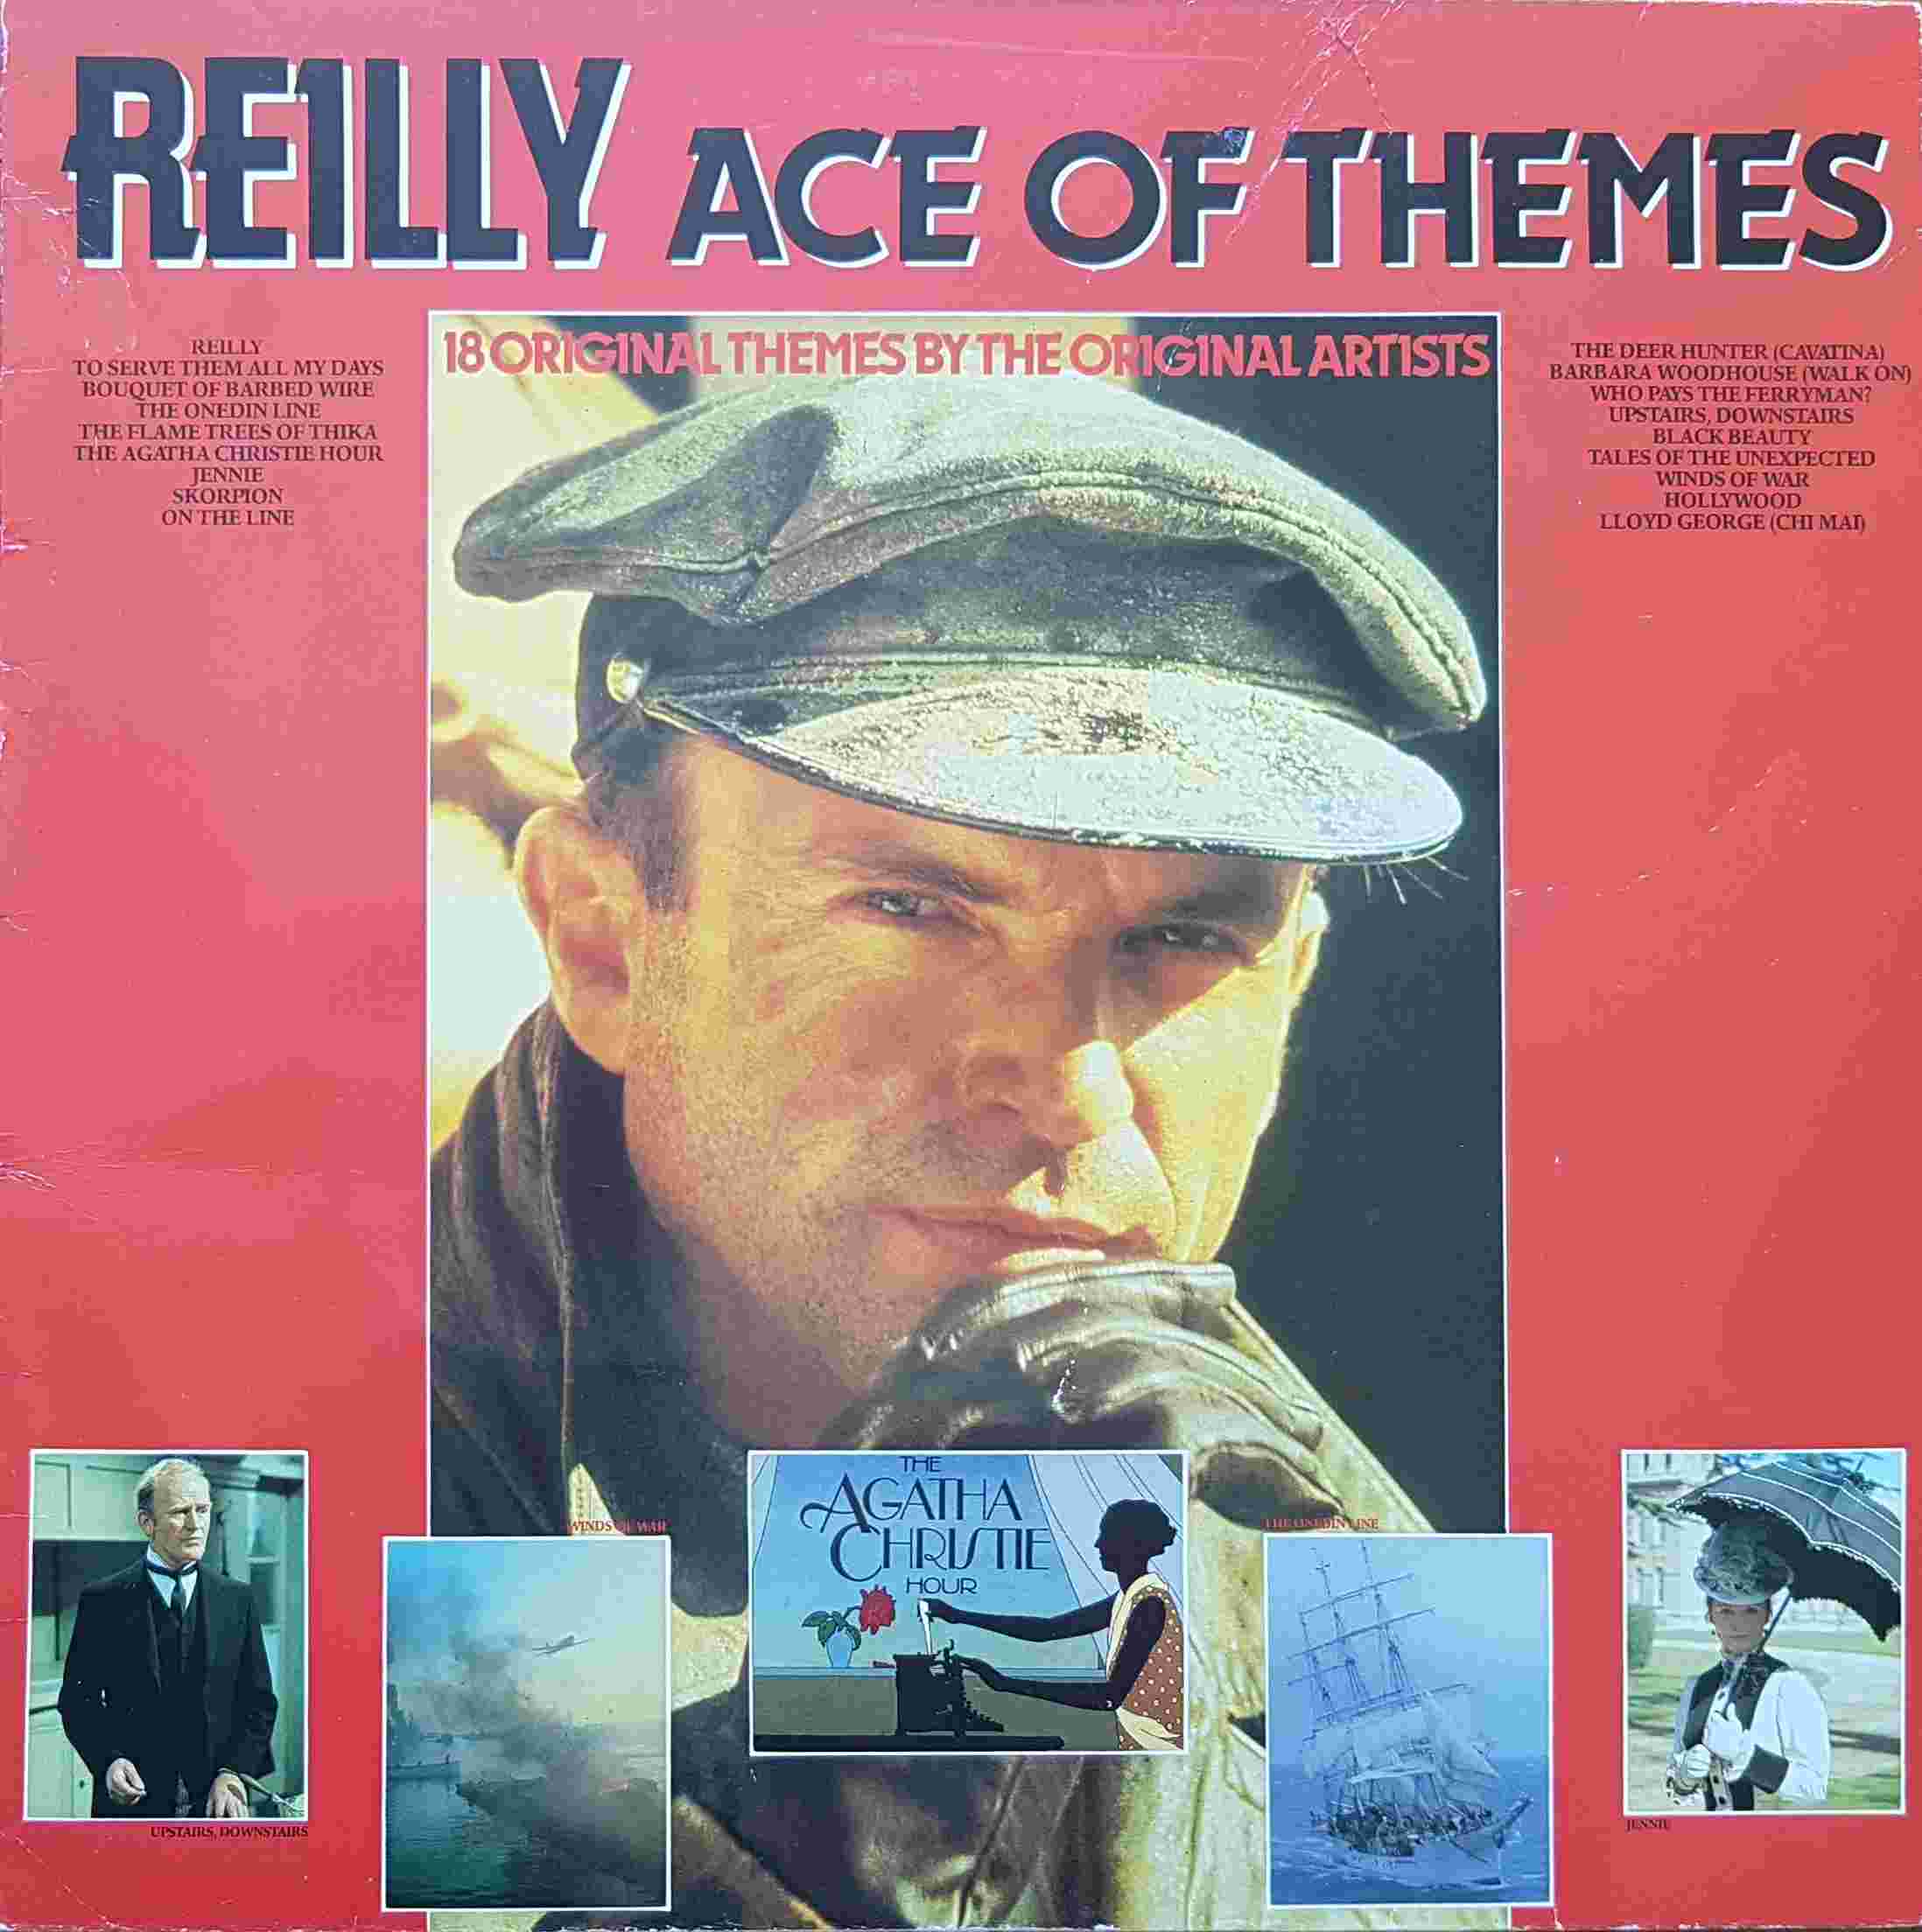 Picture of BUSLP 1004 Reilly ace of themes by artist Various from ITV, Channel 4 and Channel 5 library